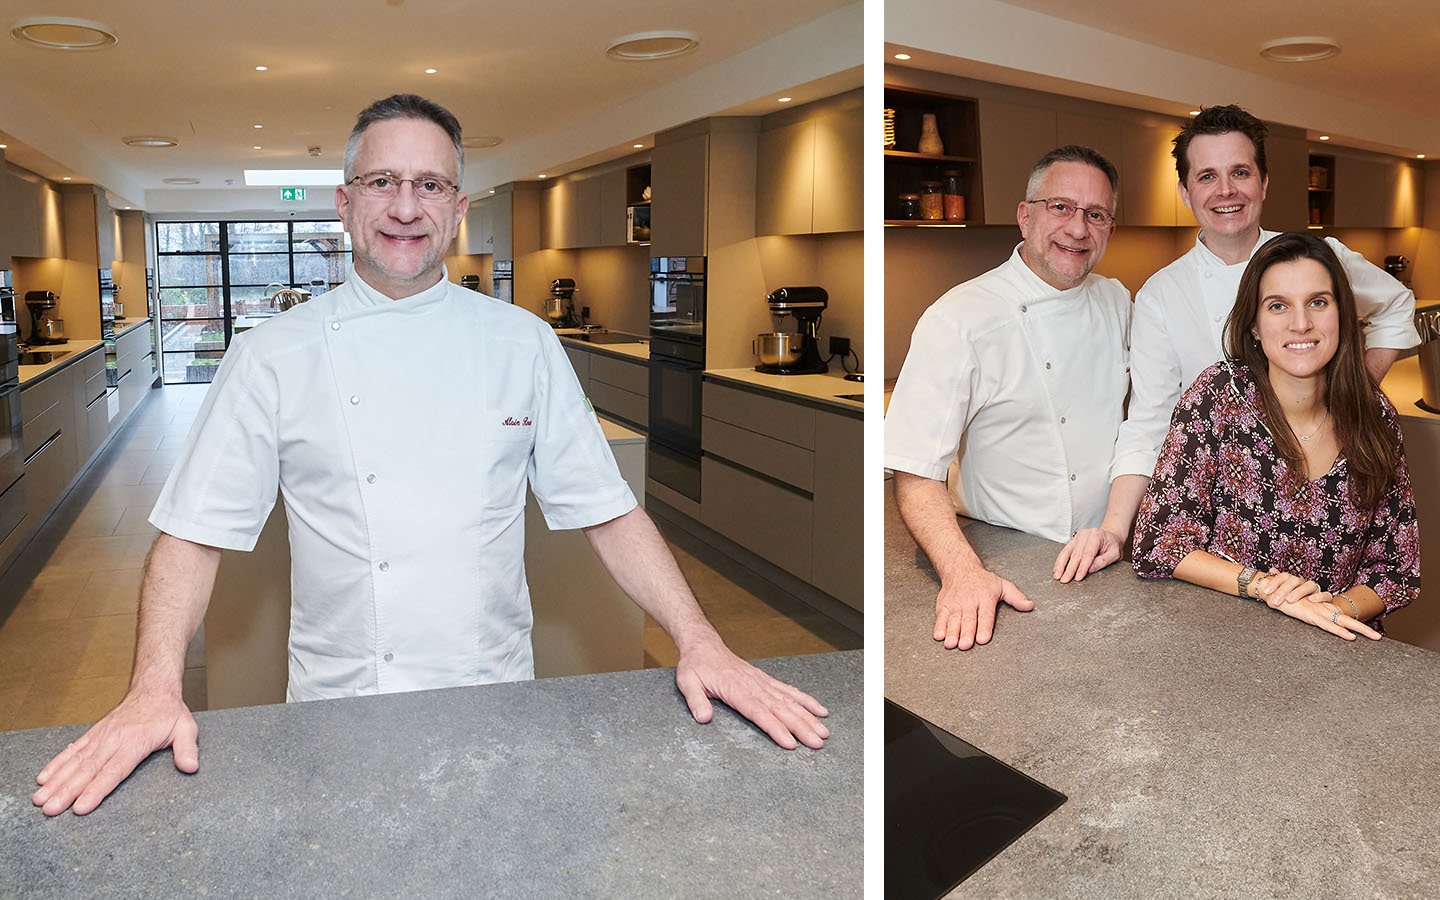 Alain Roux and the Waterside Inn team